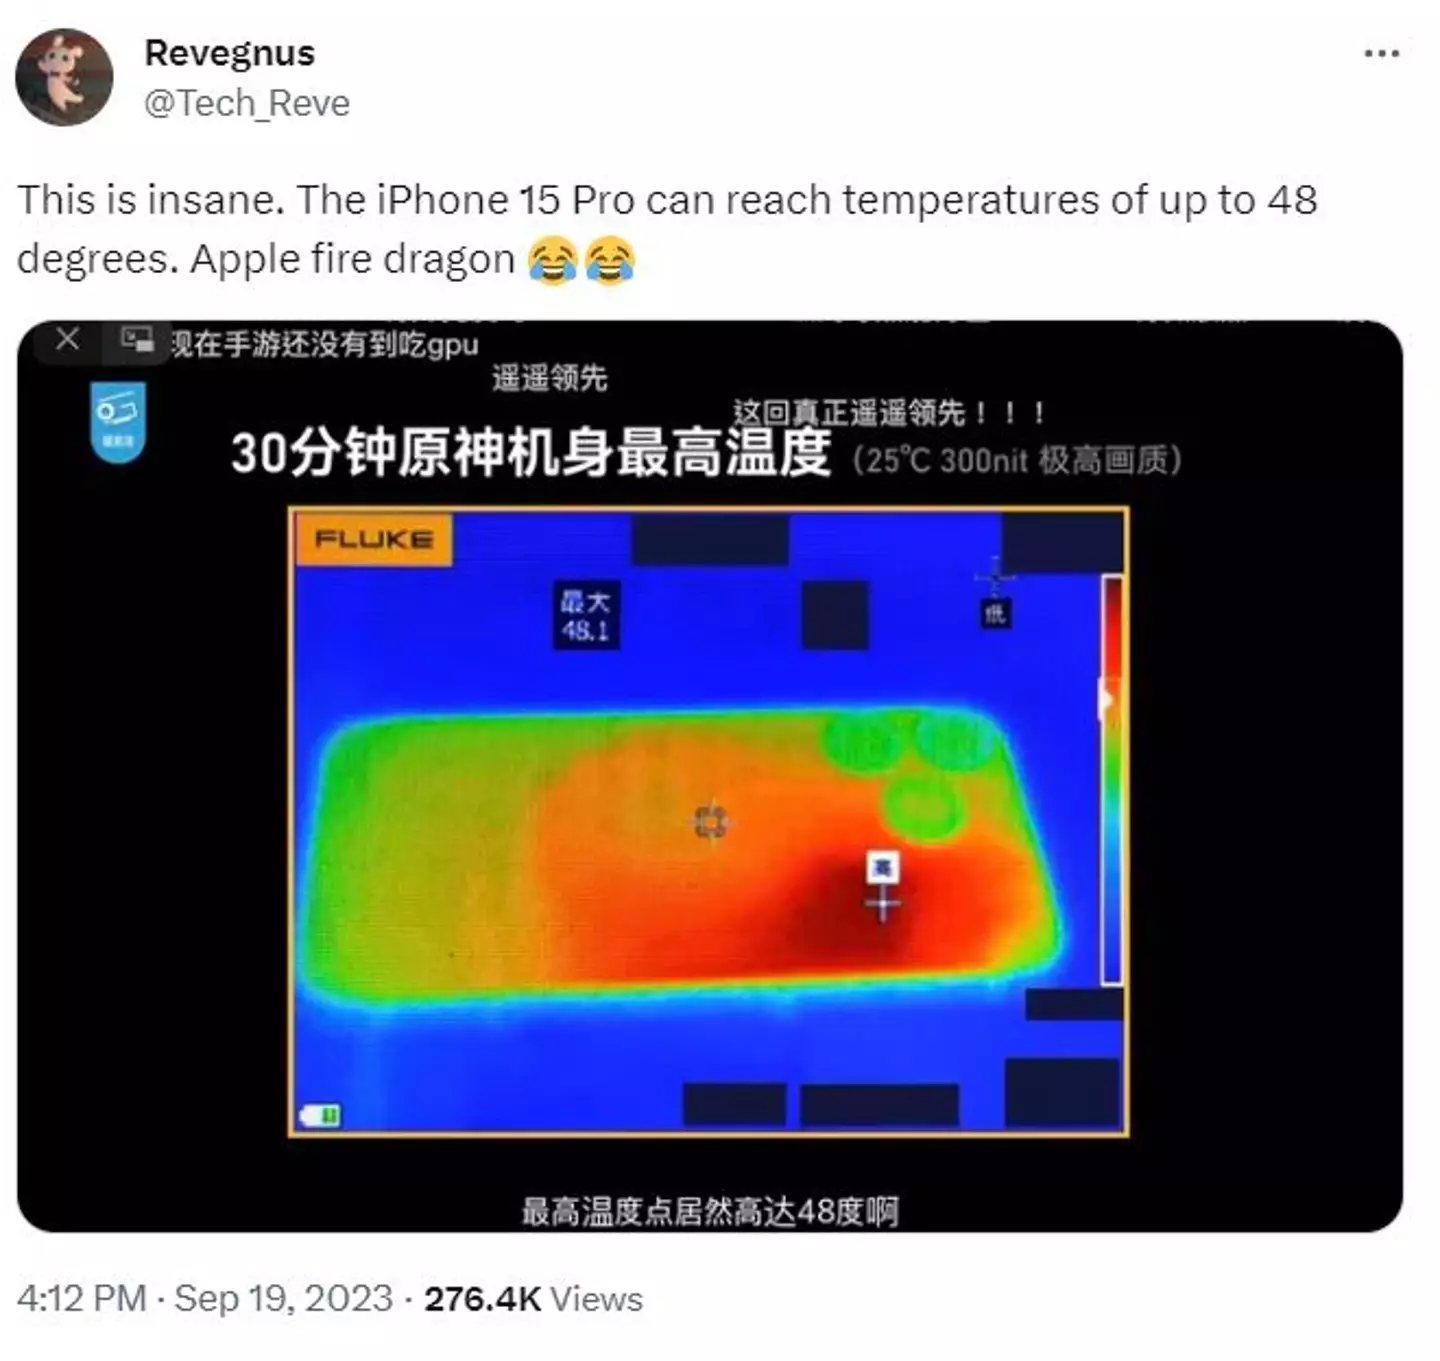 People are claiming the iPhone 15 can reach temperatures of 48C.